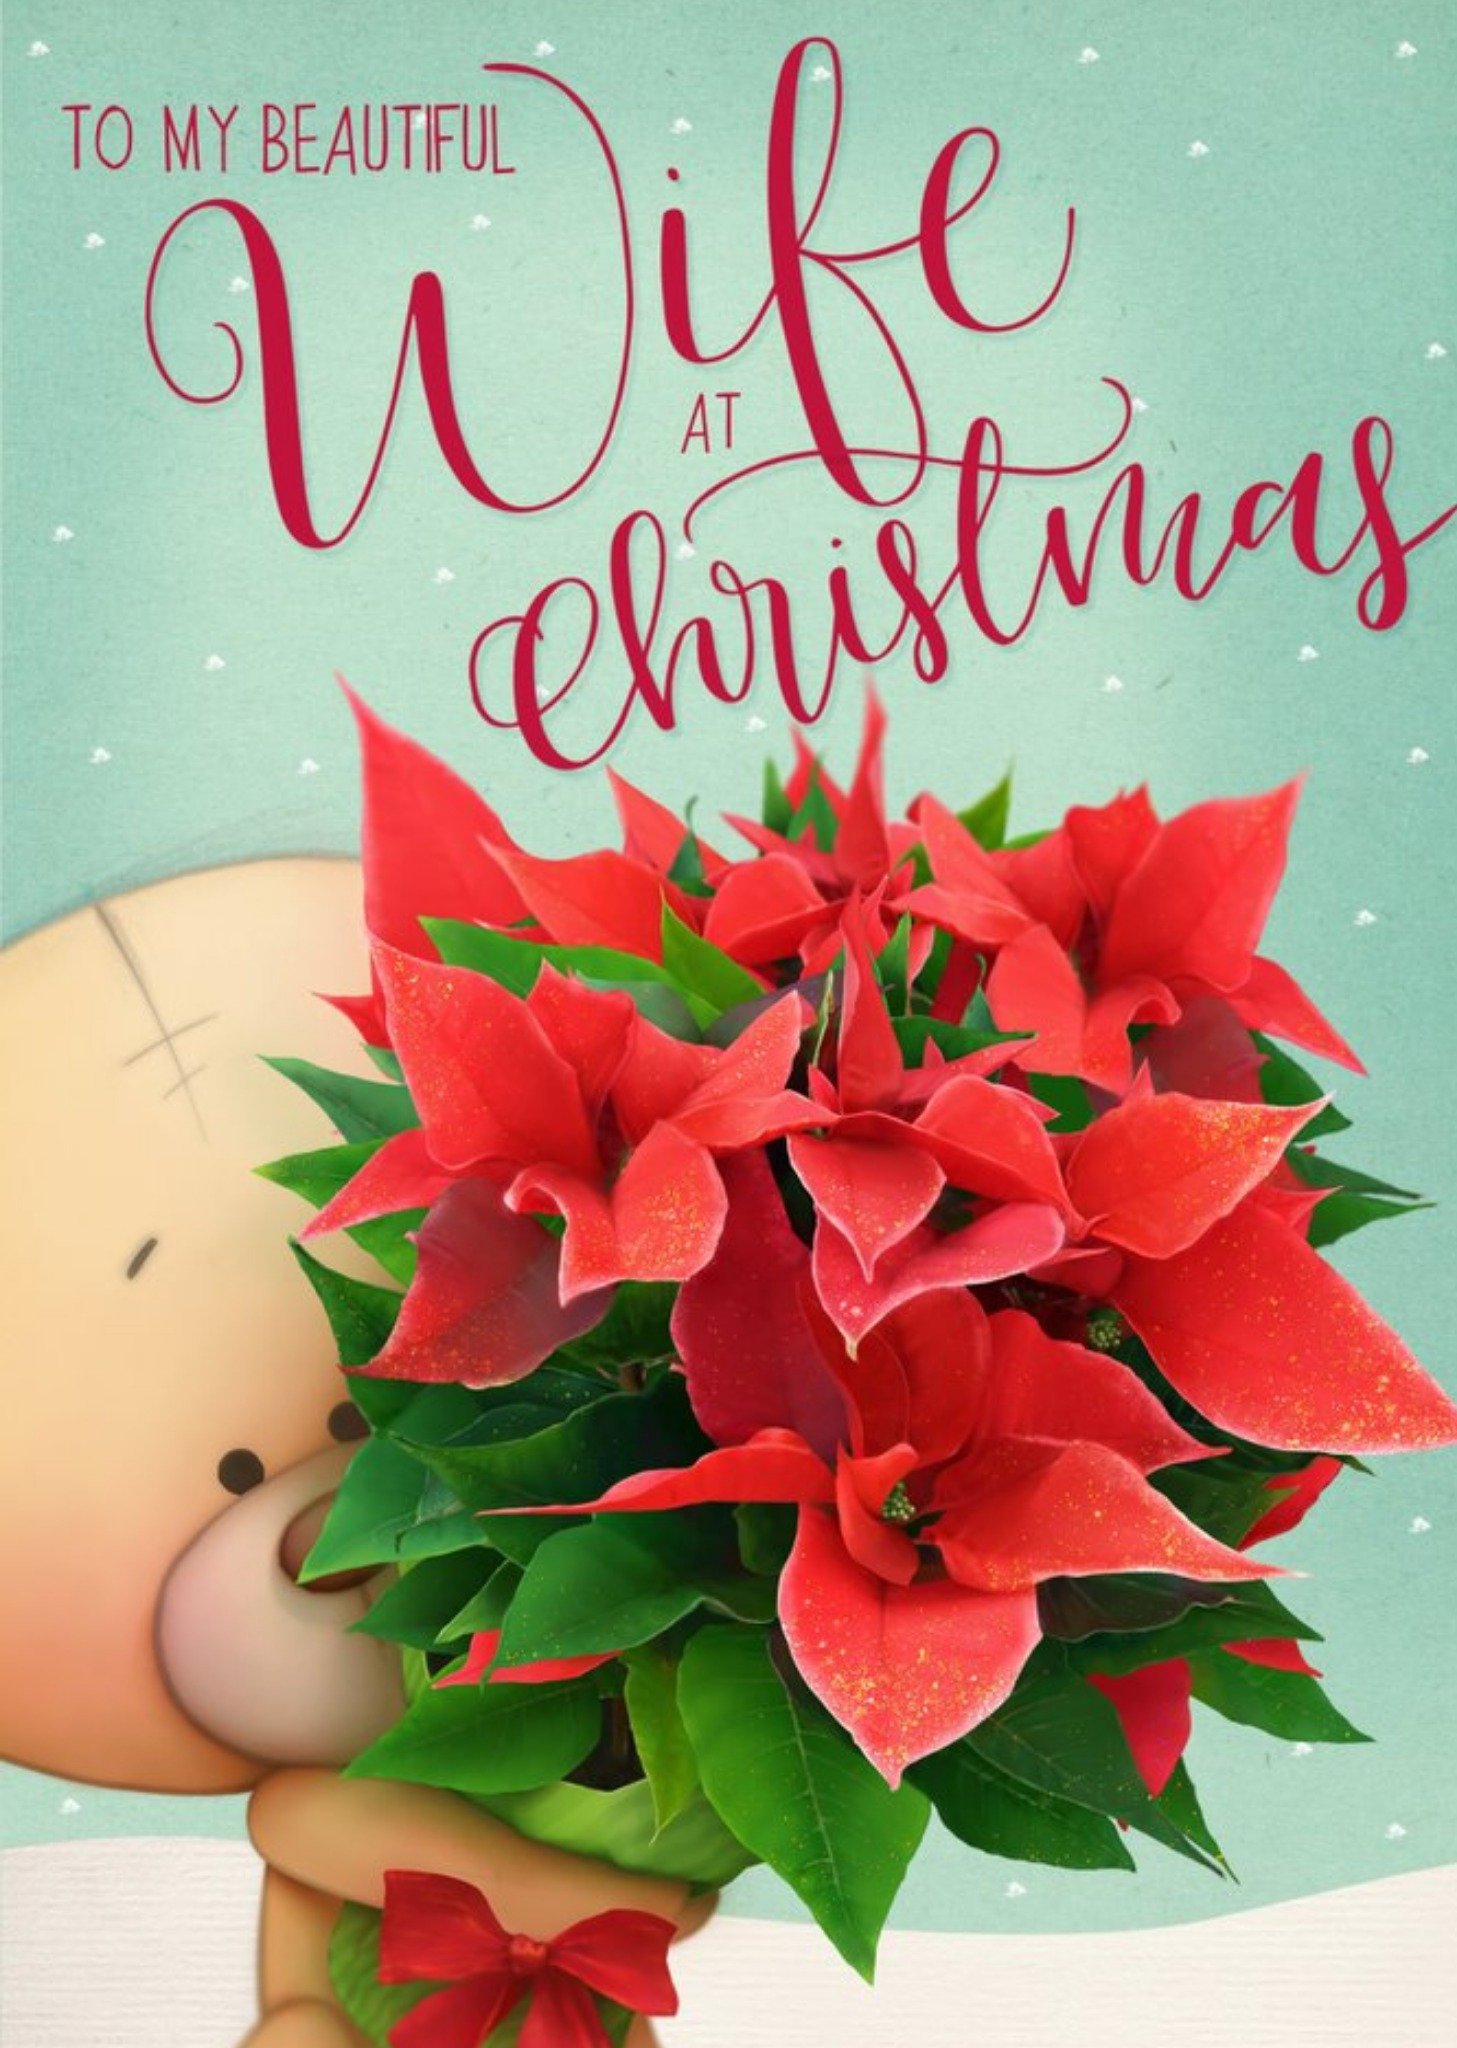 Other Uddle Christmas Card To My Beautiful Wife At Christmas Ecard